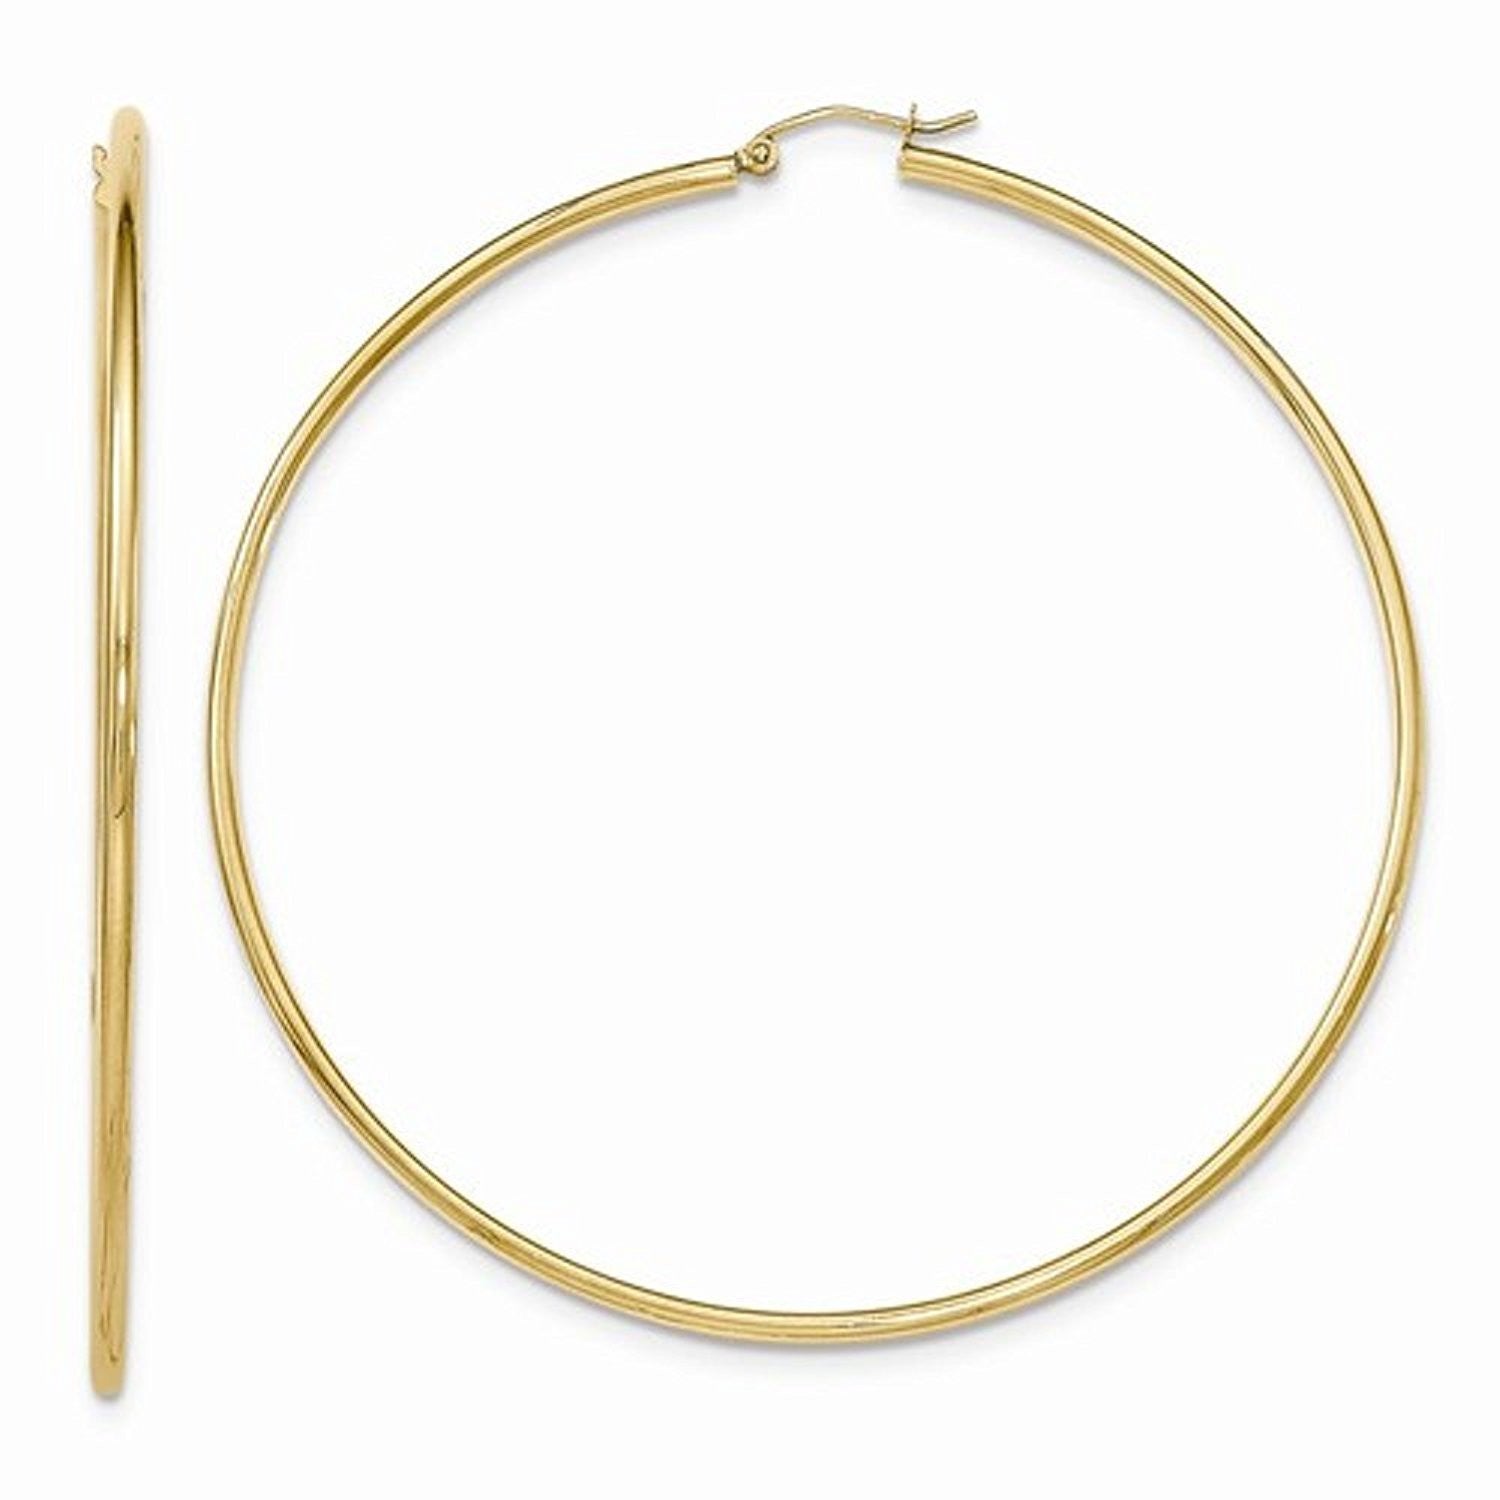 14K Yellow Gold 75mm x 2mm Classic Round Hoop Earrings